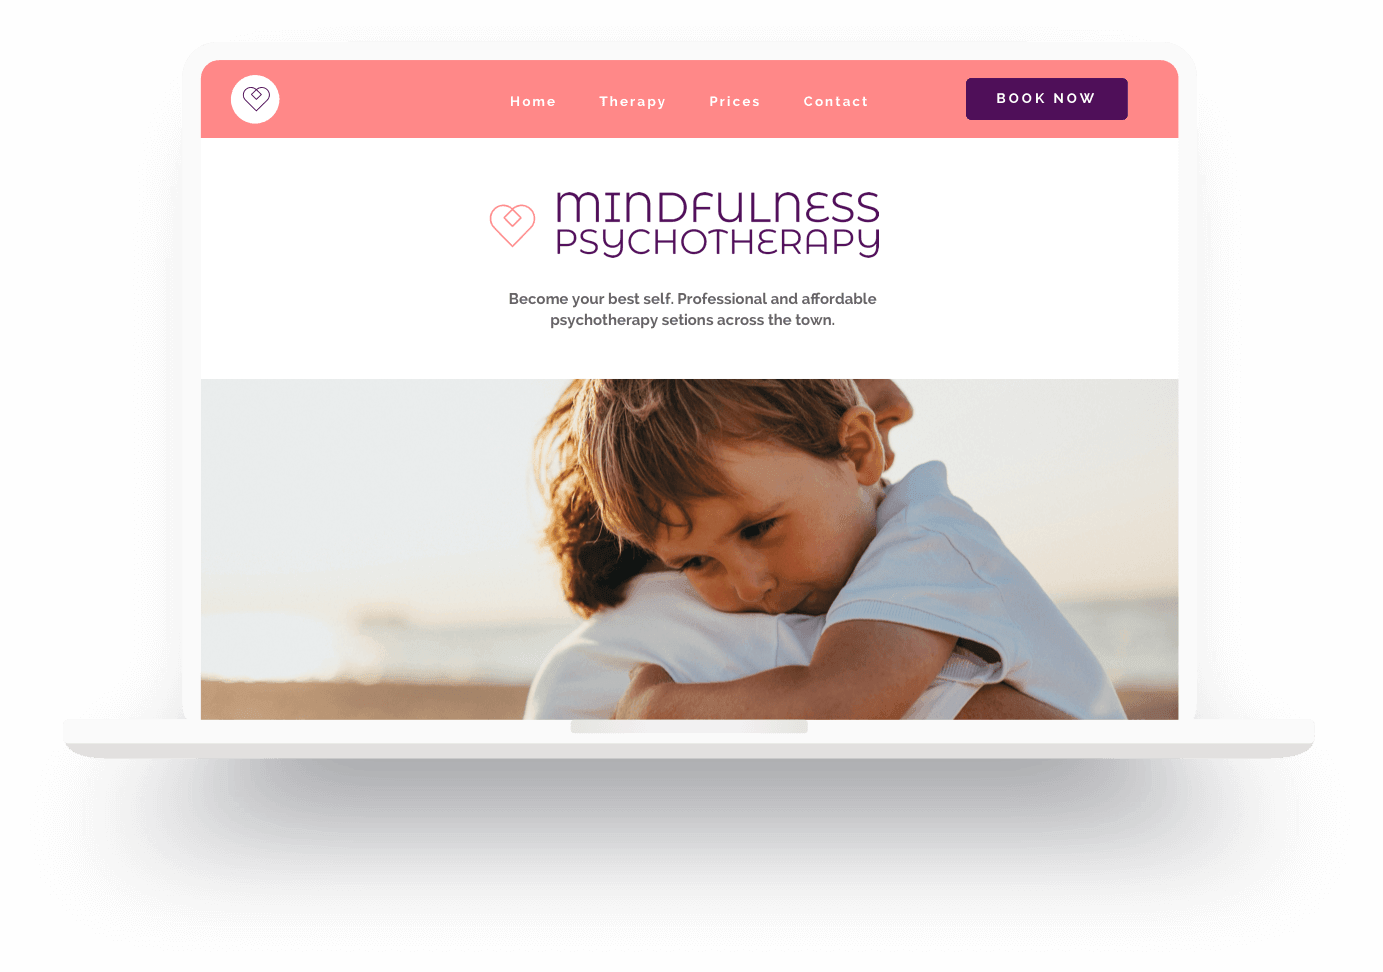 Example of a psychotherapy practice website built with Jimdo